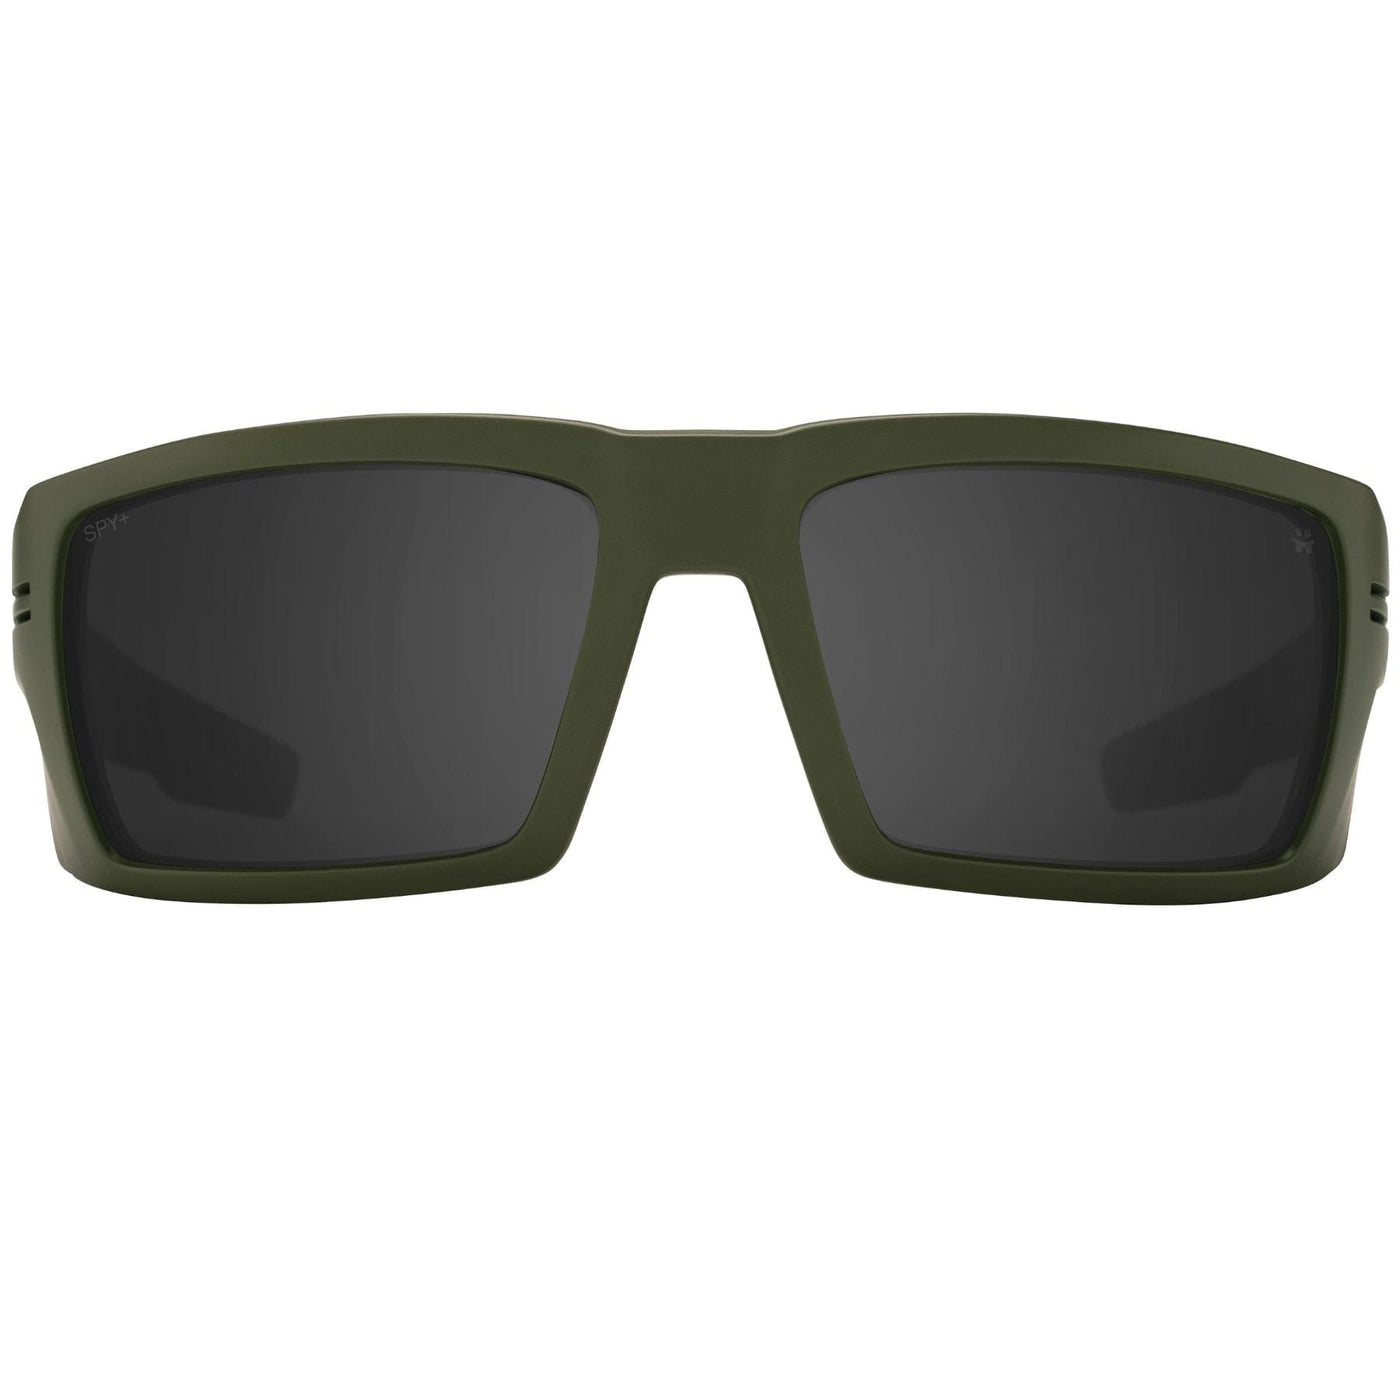 SPY REBAR ANSI Sunglasses, Happy Lens - Gray/Army Green 8Lines Shop - Fast Shipping